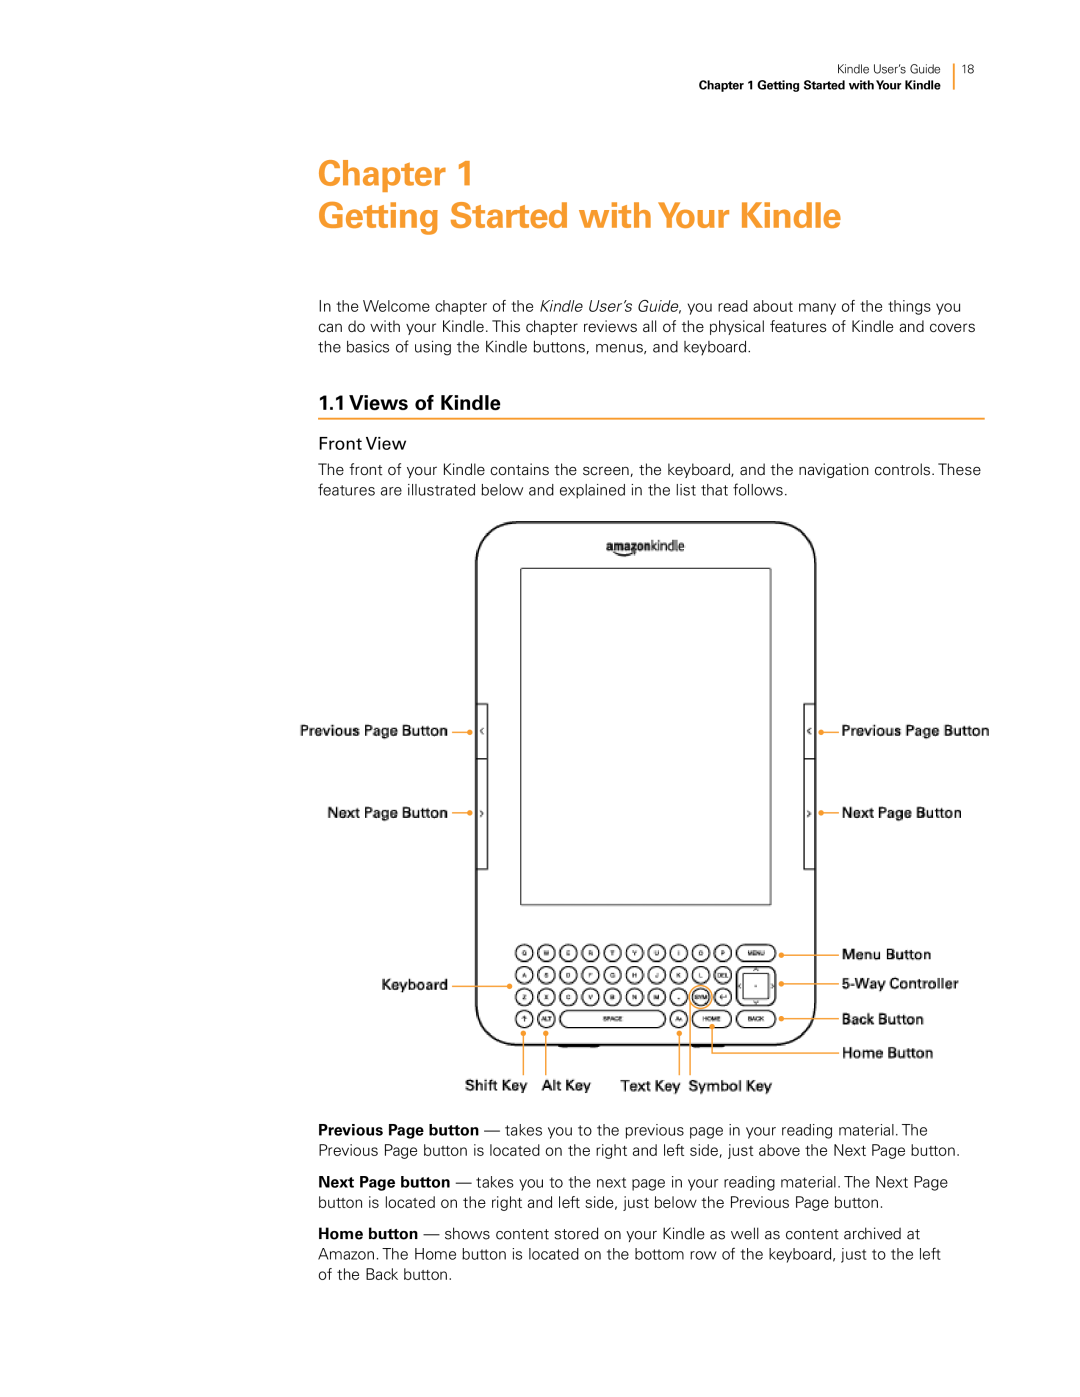 Amazon KNDKYBRD3G manual Chapter Getting Started with Your Kindle, Views of Kindle, Front View 